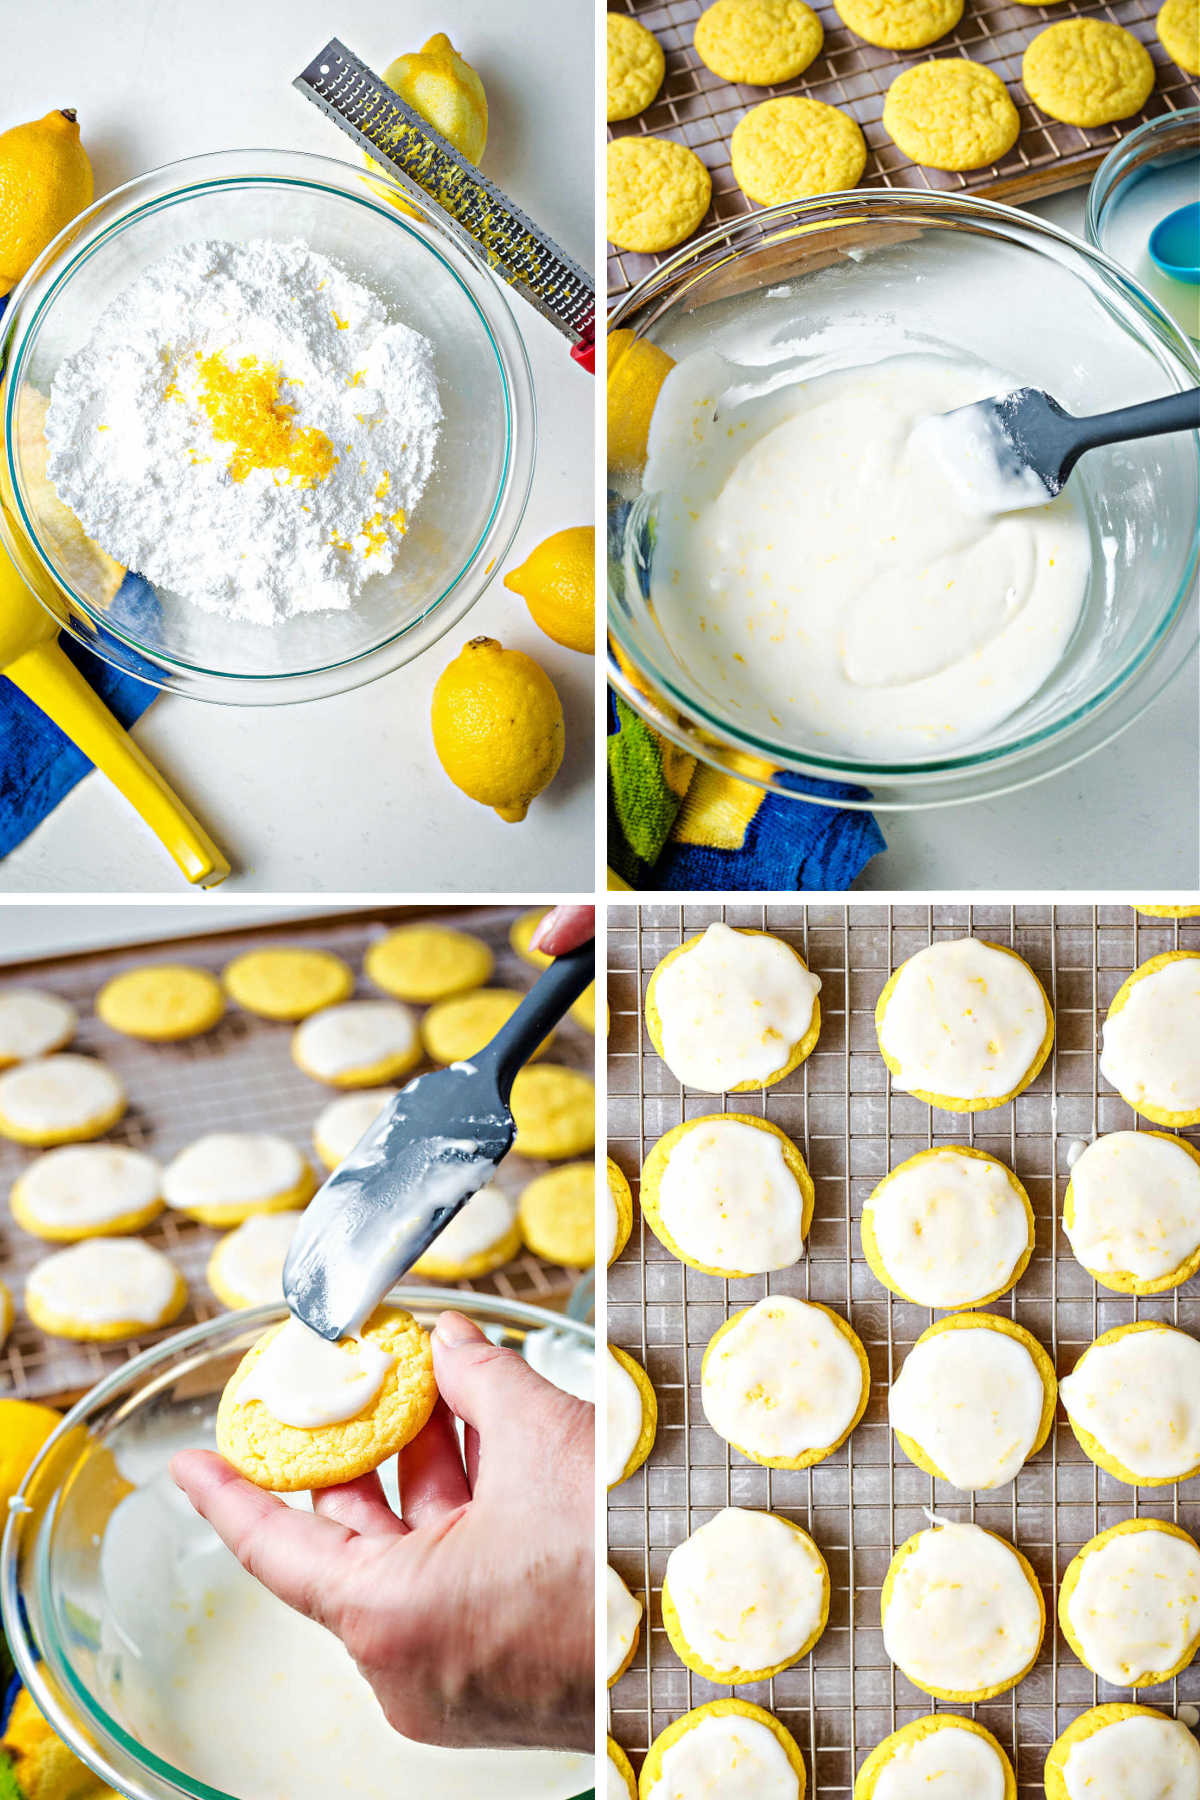 process steps for making lemon glaze and spreading on cookies.